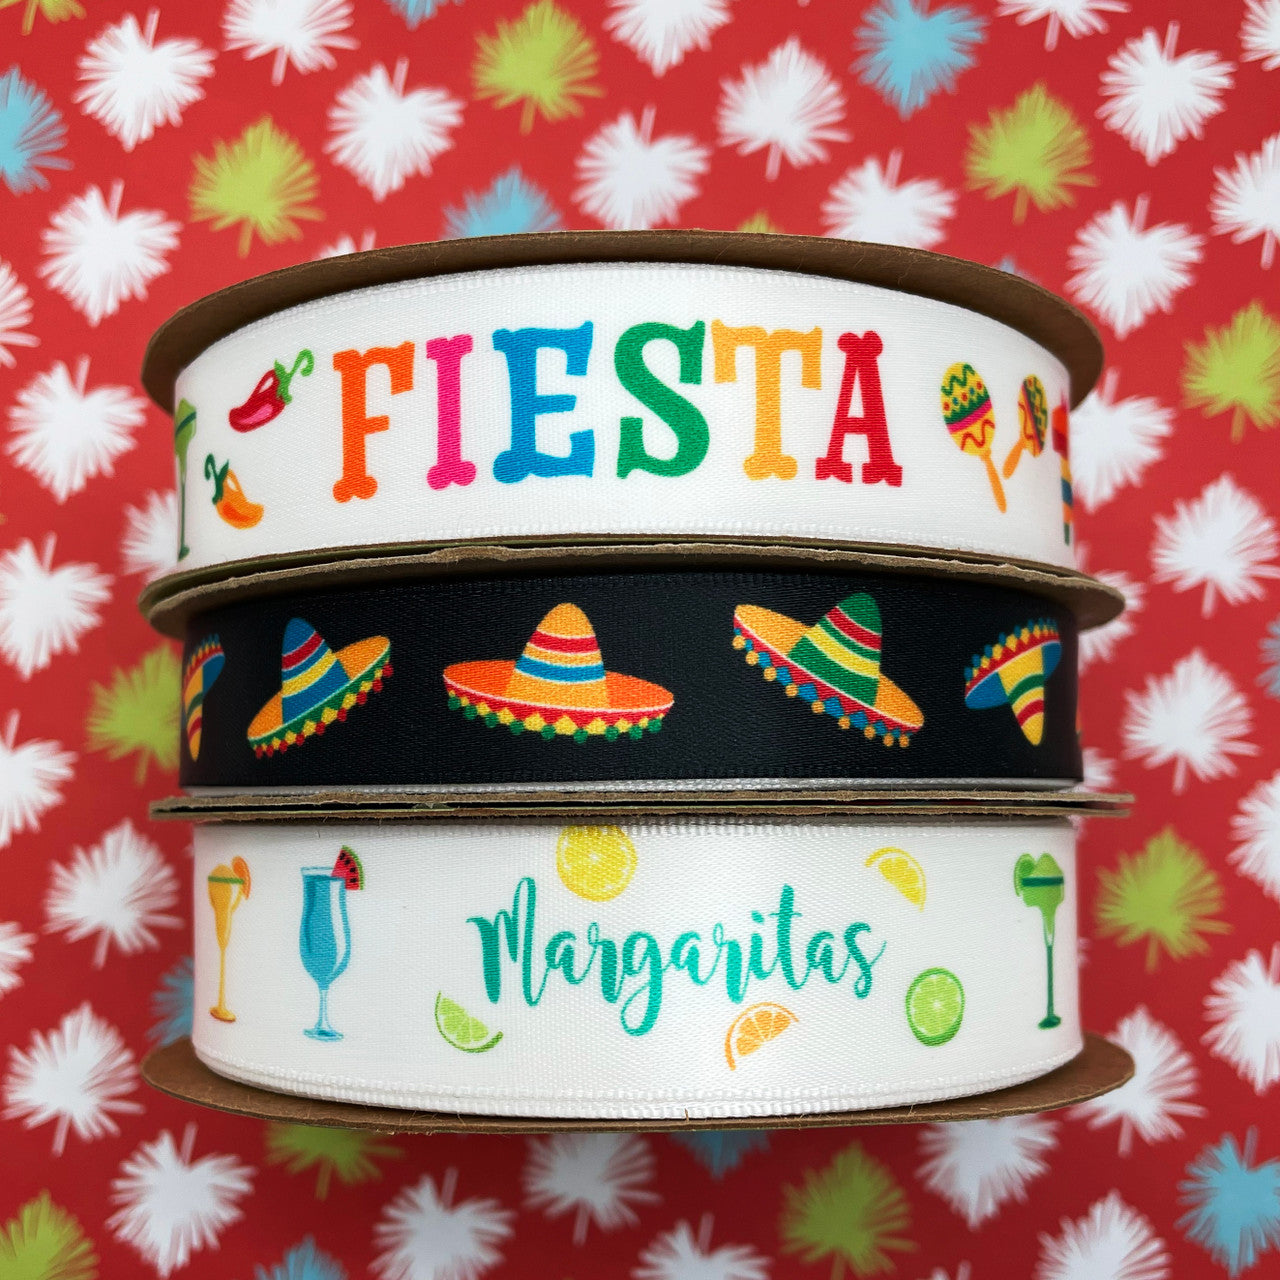 Mix and match our Sombrero ribbon with Fiesta and Margaritas ribbons to complete the party theme!